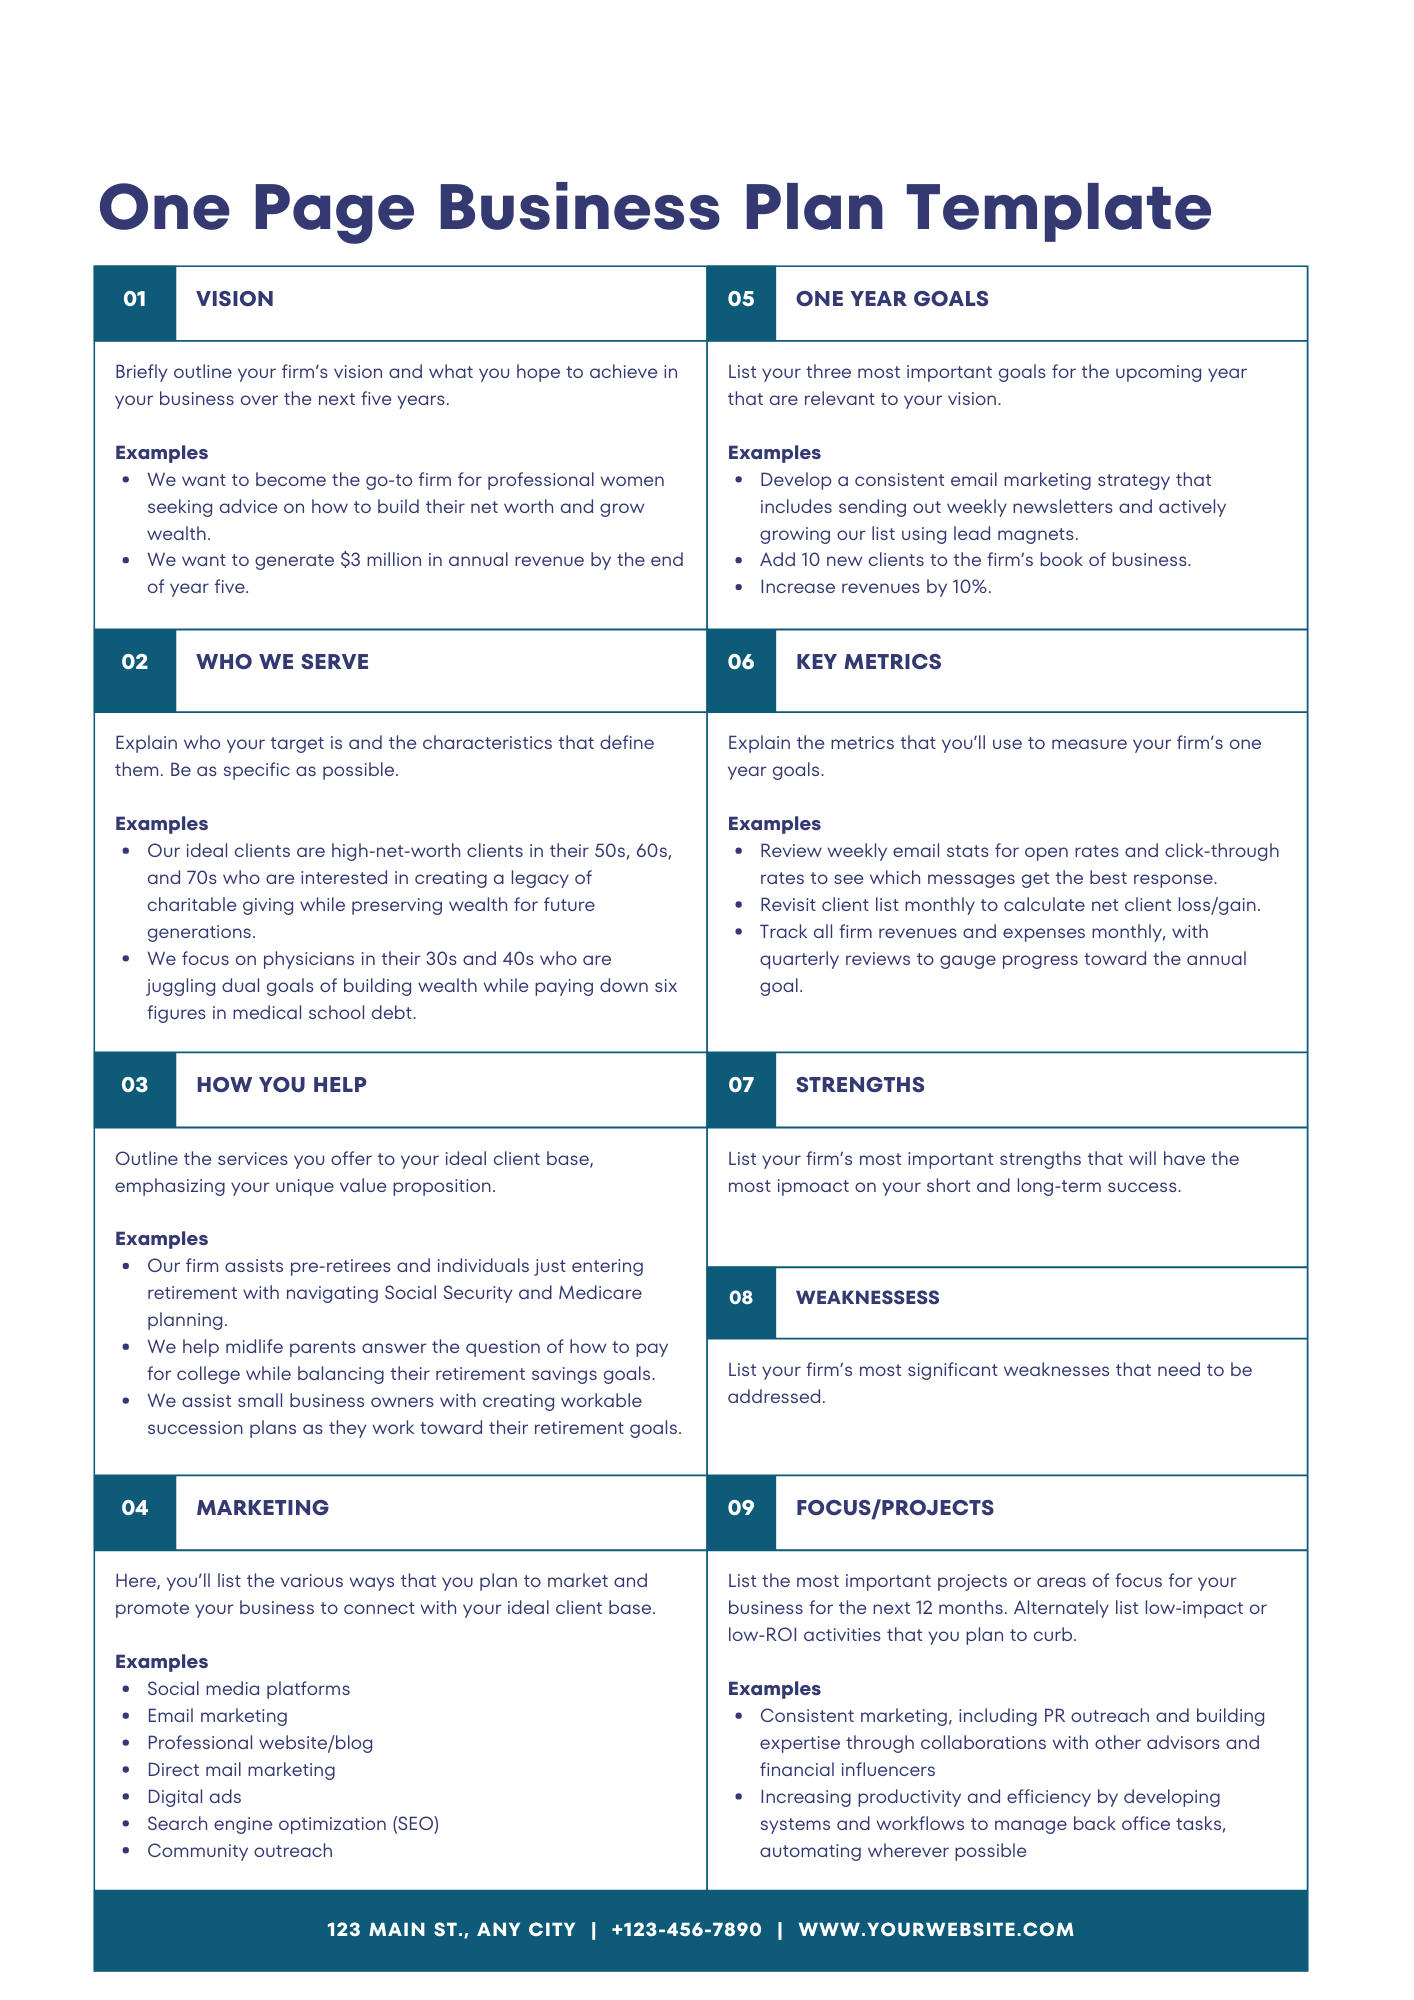 One Page Financial Advisor Business Plan Template